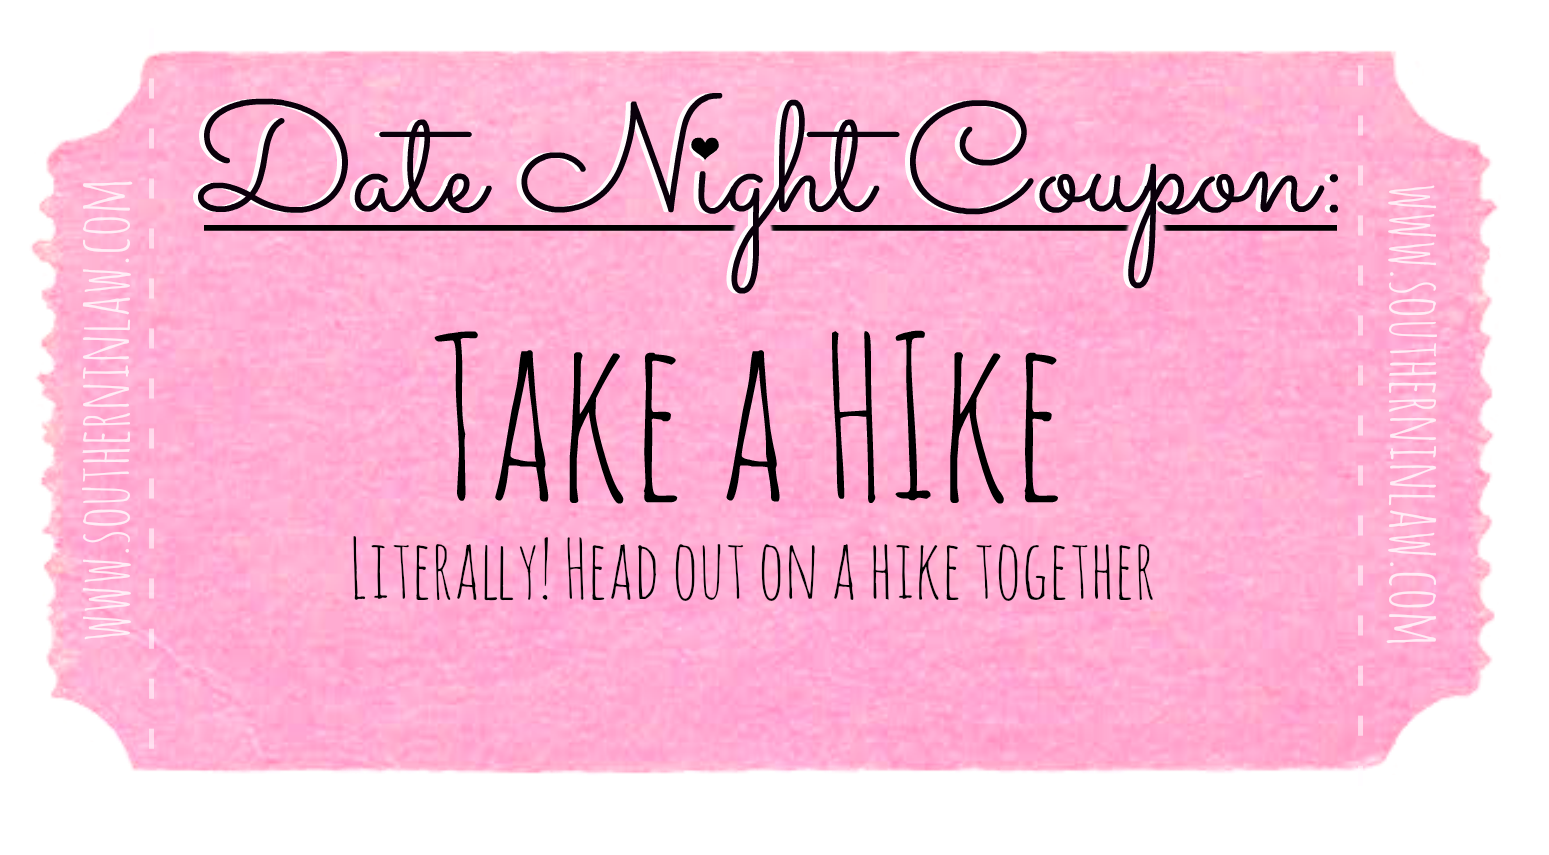 Affordable Date Ideas - Cheap Date Ideas Coupons - Go on a Hike